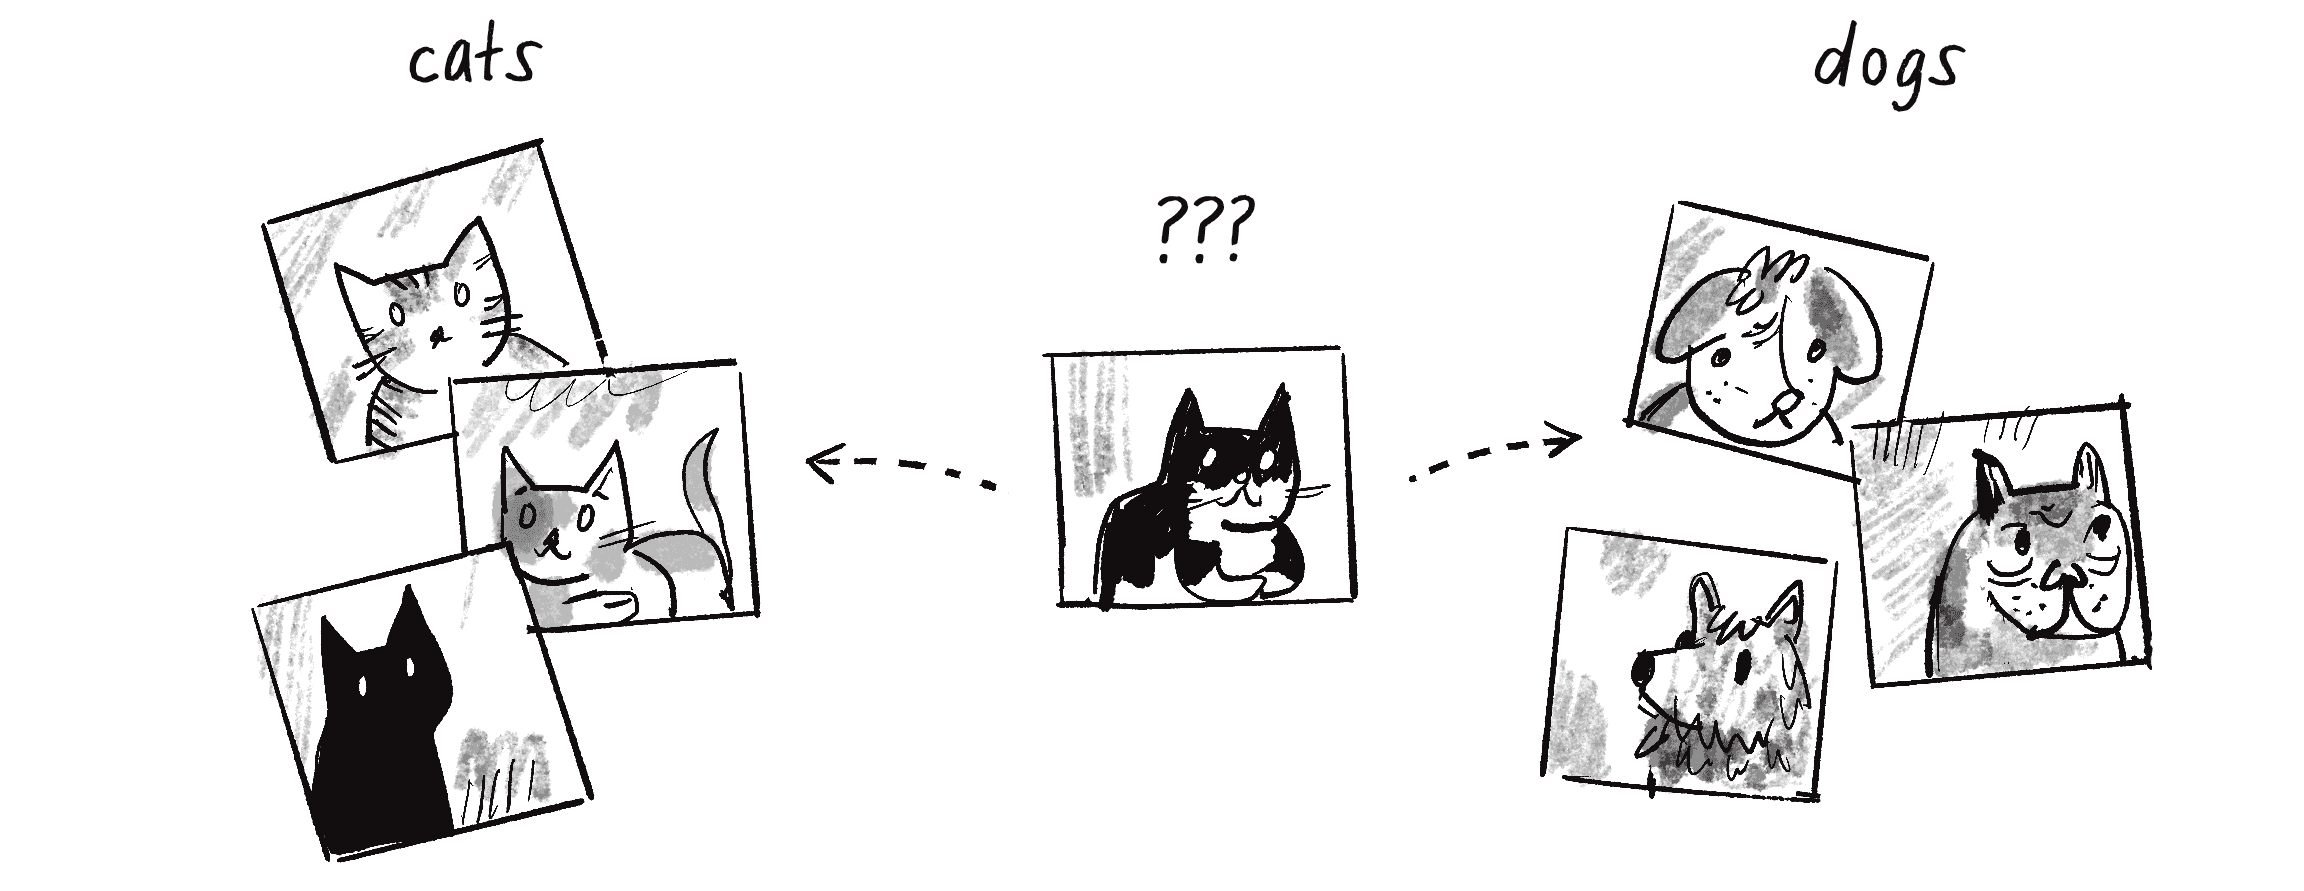 Figure 10.14: Labeling images as cats or dogs